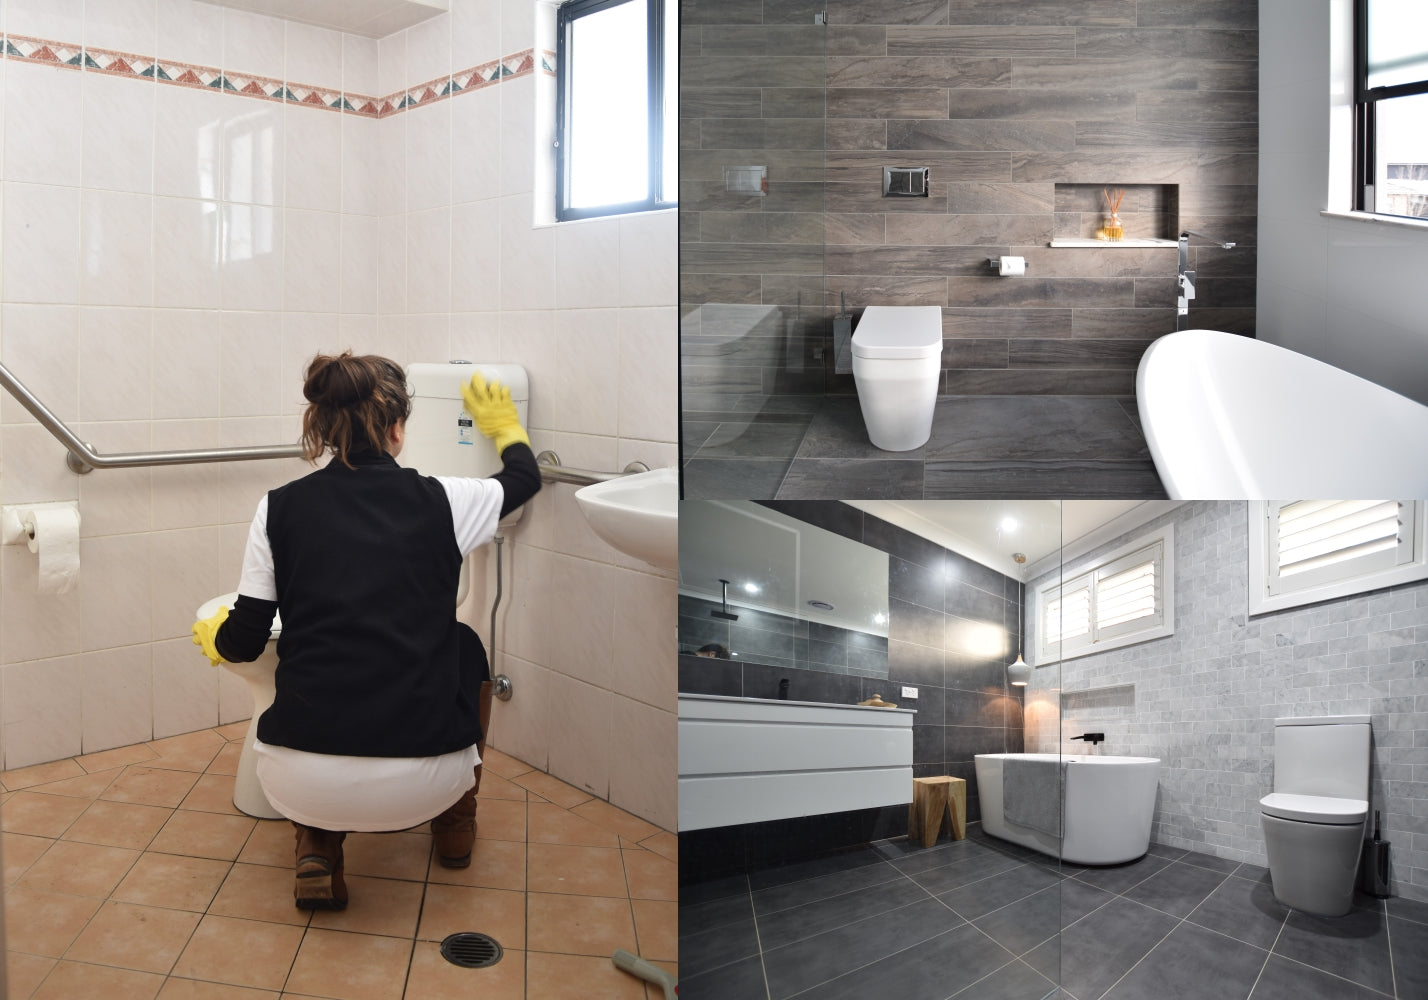 Bathroom designs that are easy to clean and low maintenance, especially for shower, vanity and toilet